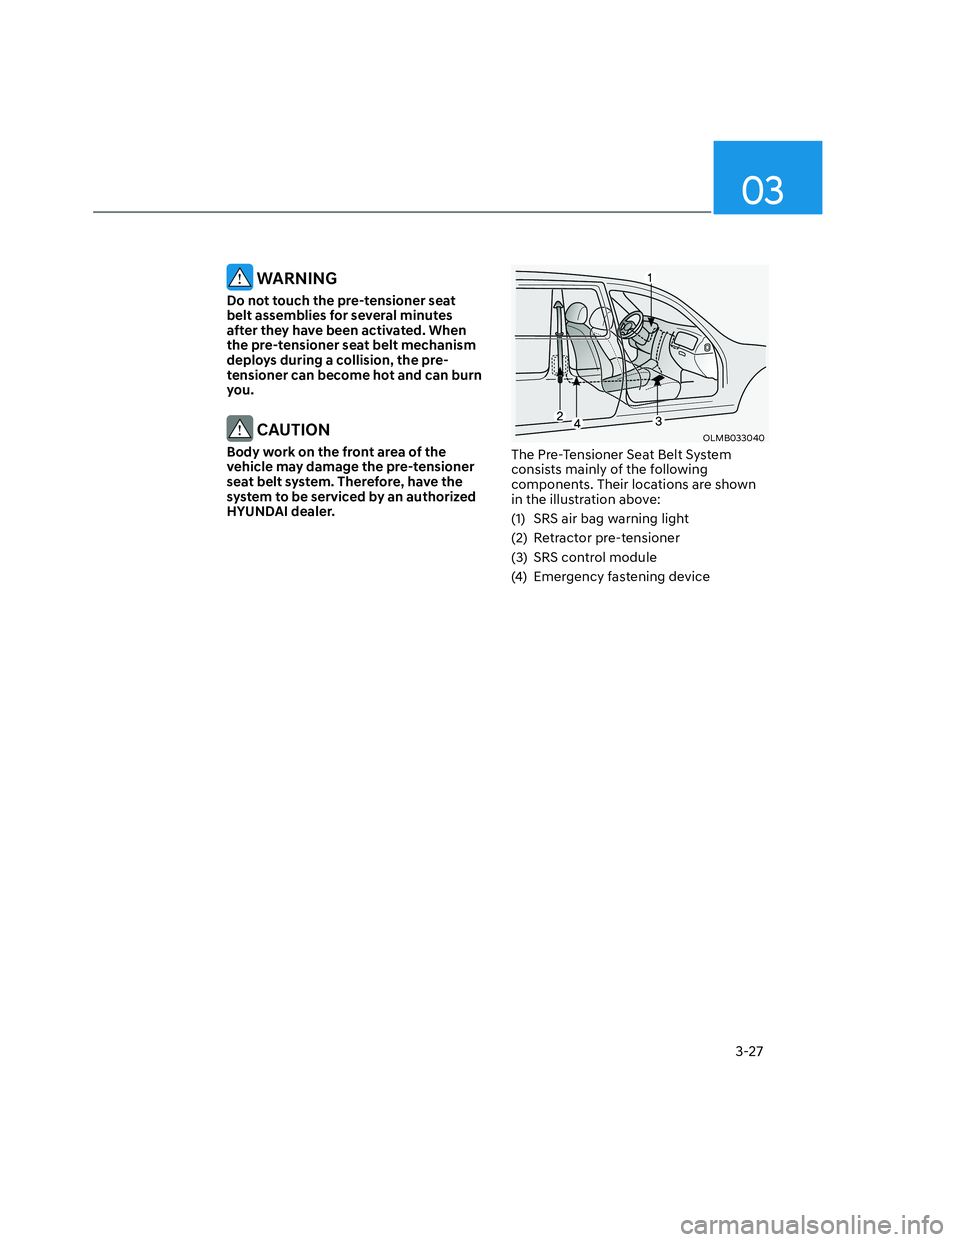 HYUNDAI SANTA CRUZ 2022 Workshop Manual 03
3-27
 WARNING
Do not touch the pre-tensioner seat 
belt assemblies for several minutes 
after they have been activated. When 
the pre-tensioner seat belt mechanism 
deploys during a collision, the 